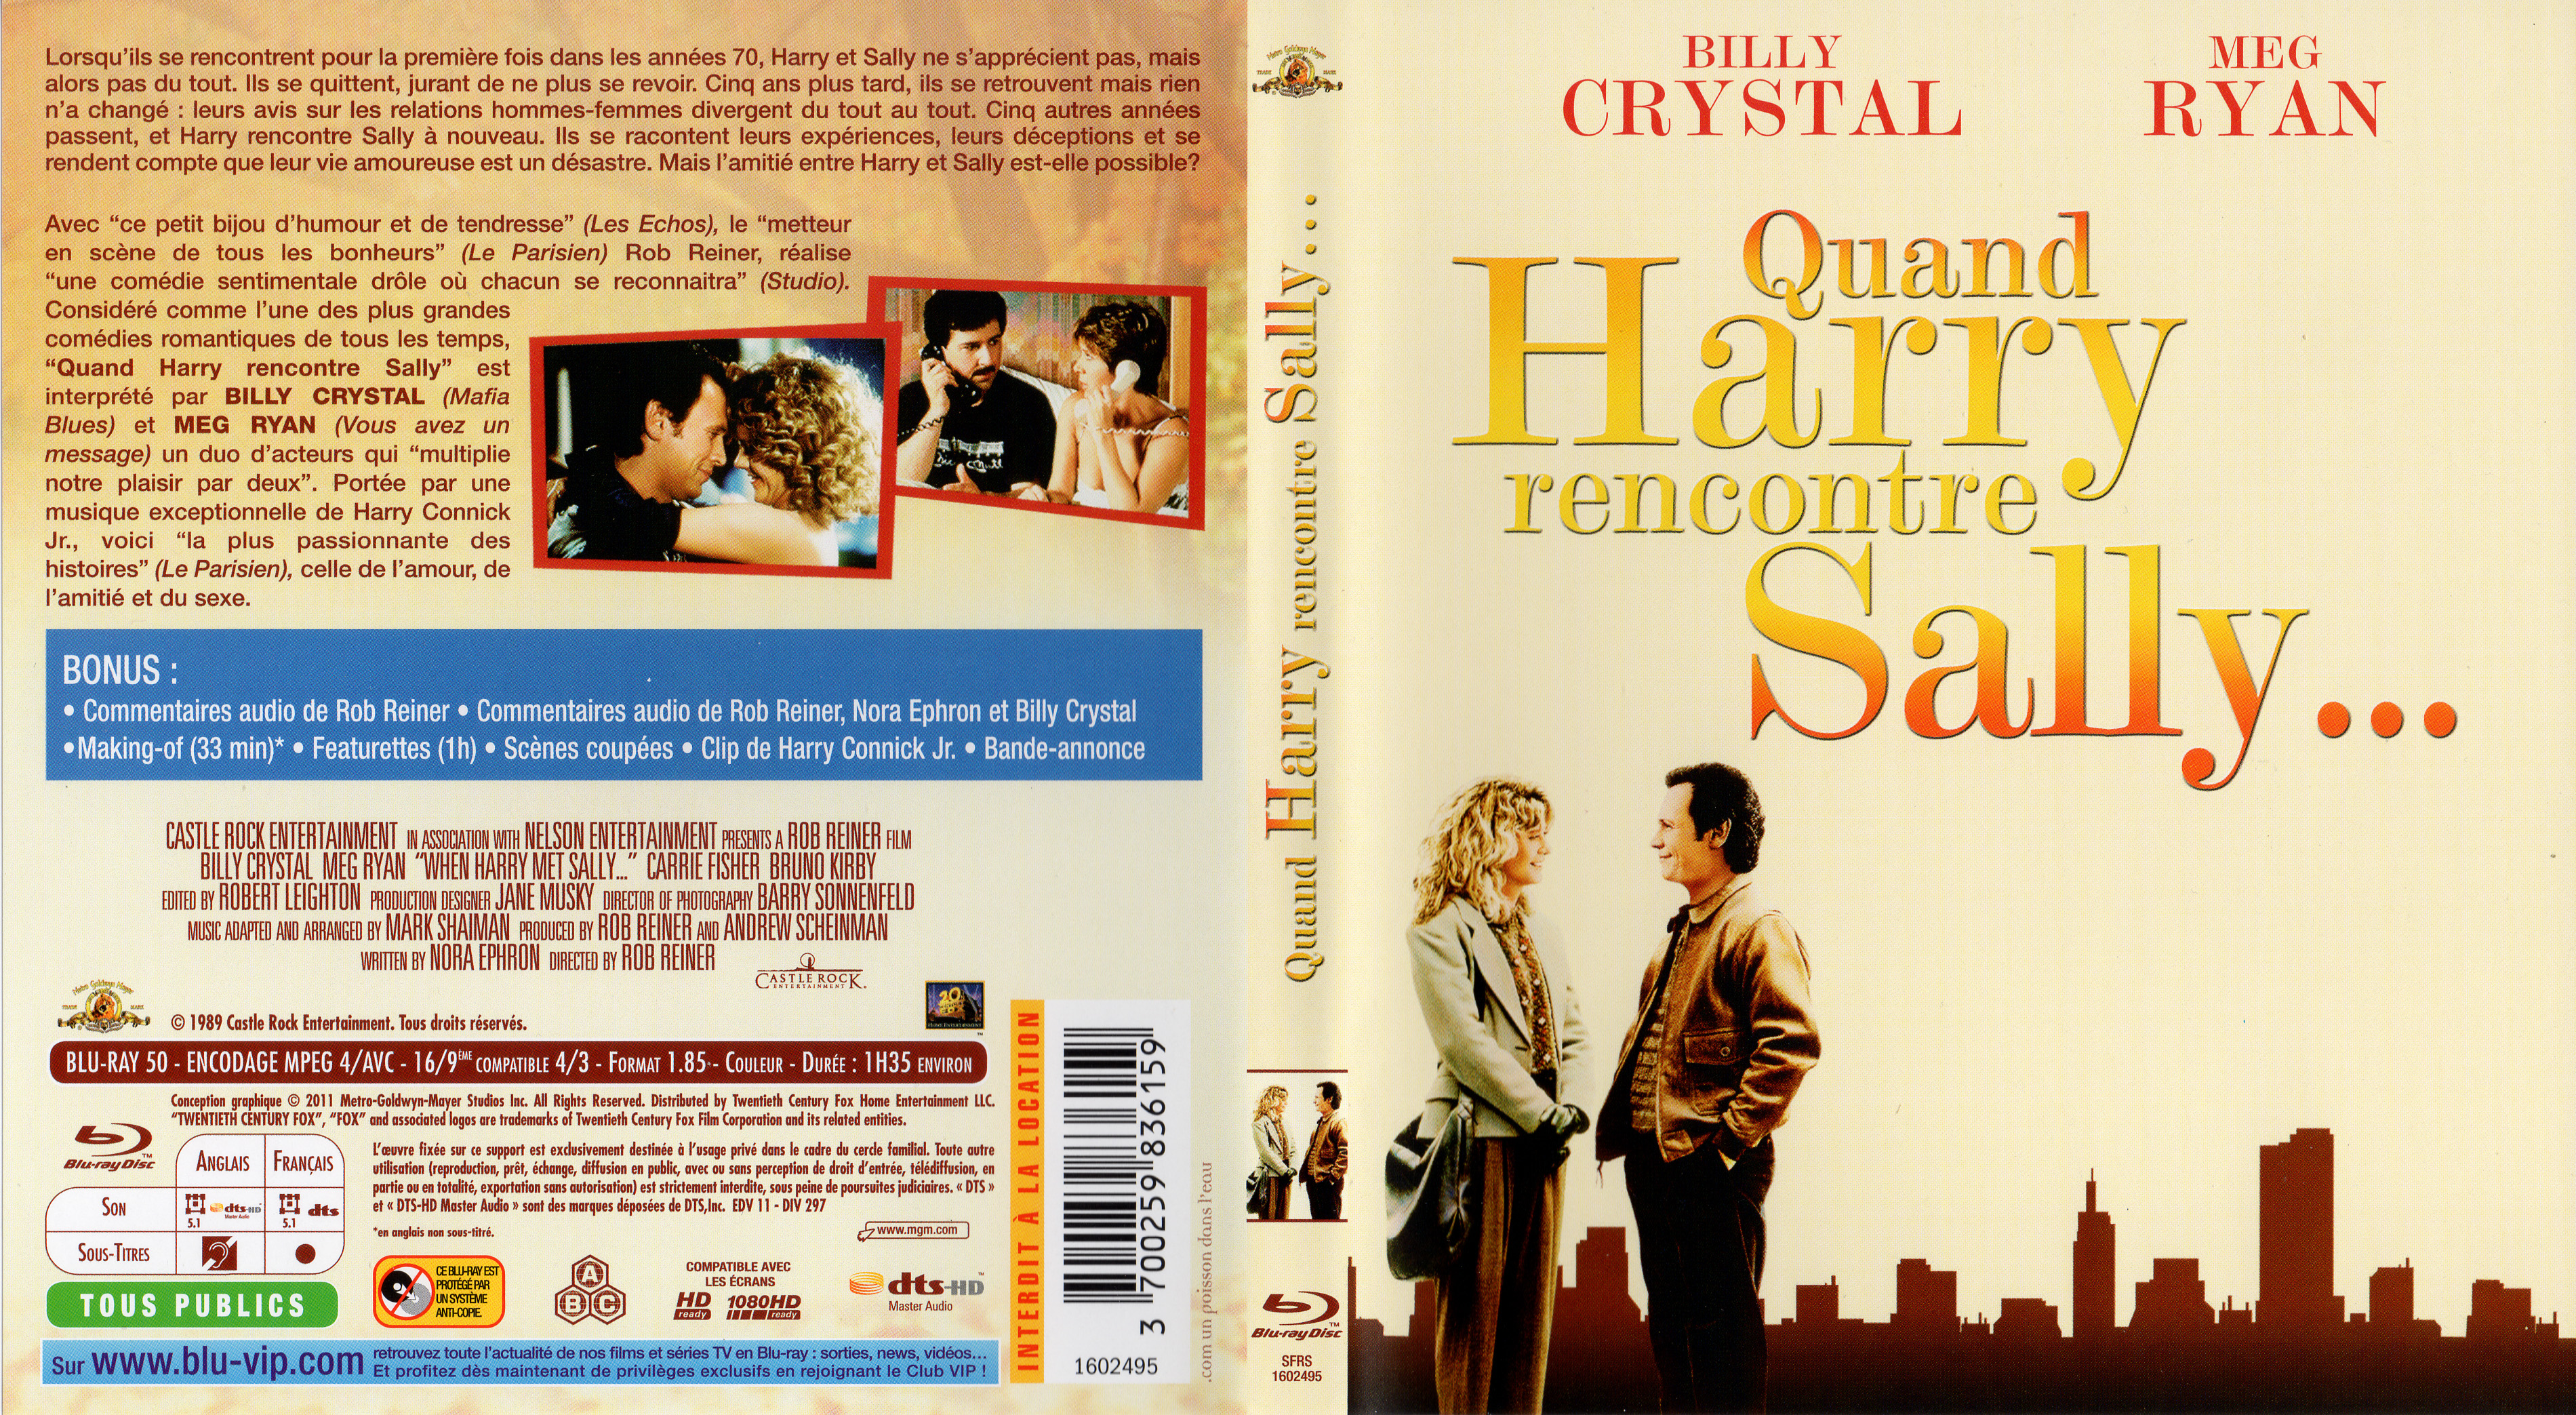 Jaquette DVD Quand Harry rencontre Sally (BLU-RAY)